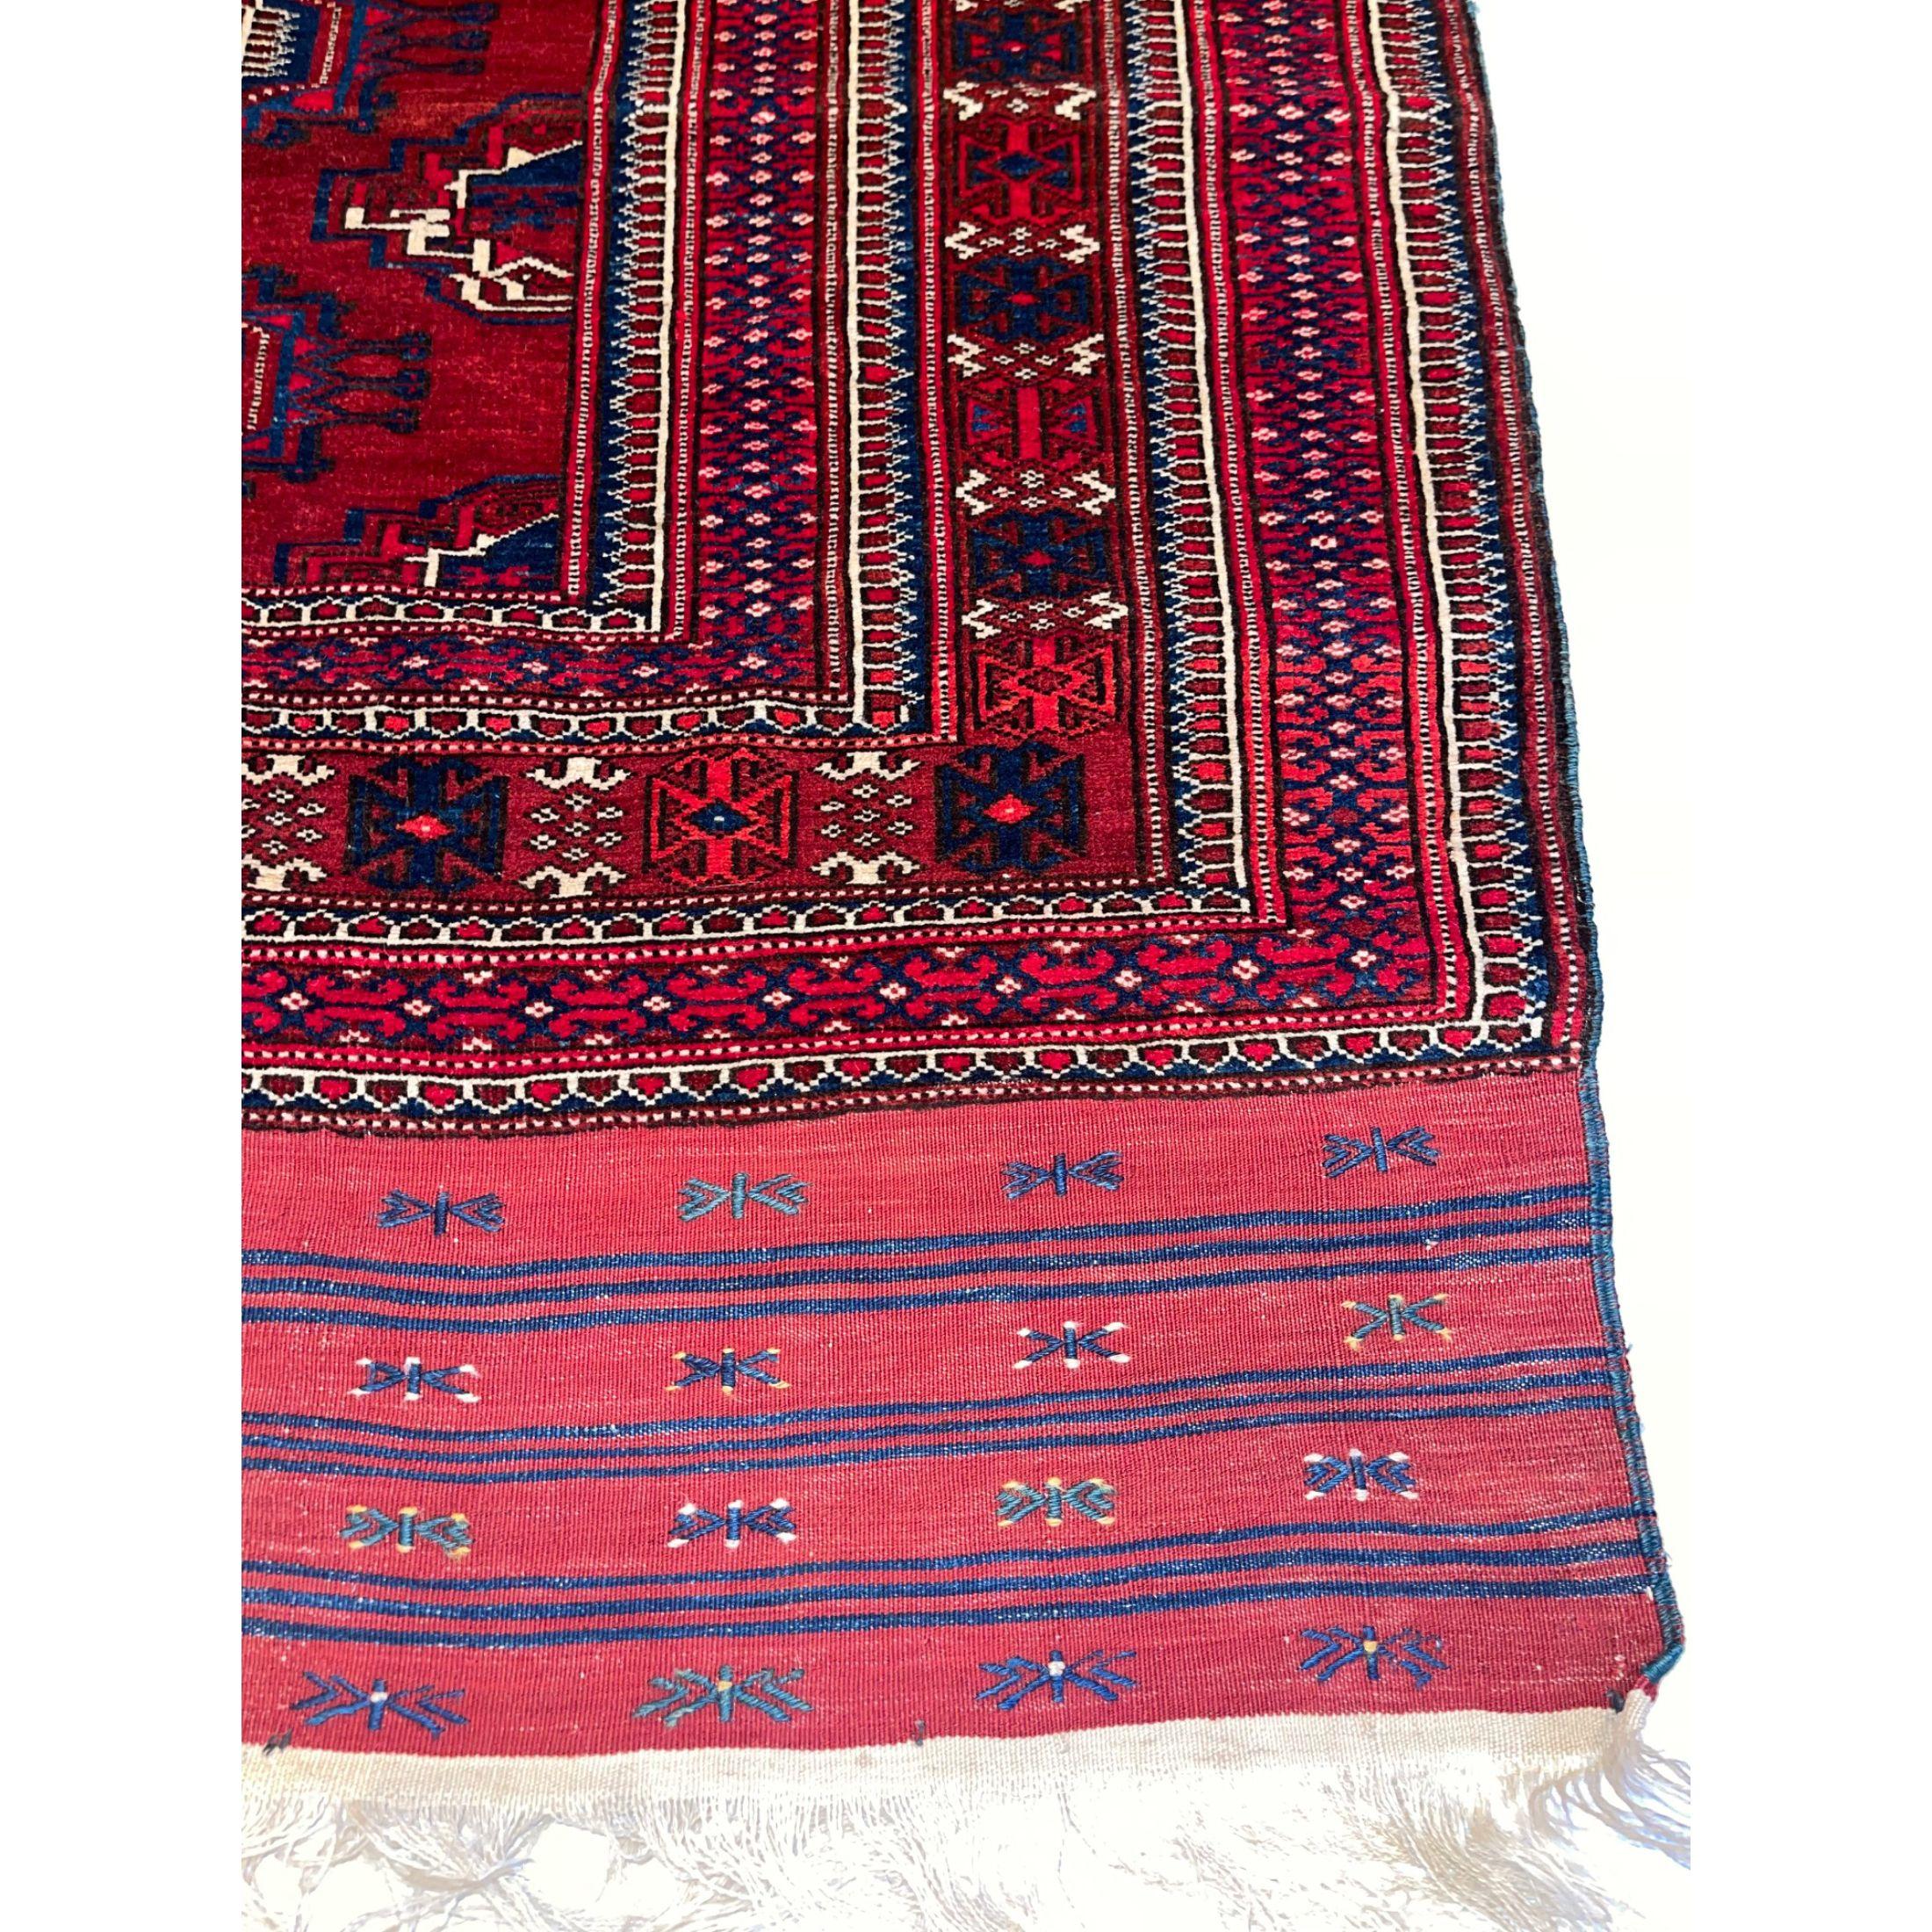 Salor rug, floor covering handmade by the Salor Turkmen of Turkmenistan. Most consistent in design are the main carpets, with a quartered gul (motif) showing a small animal figure in the inner part of each quadrant. The faces of storage bags are